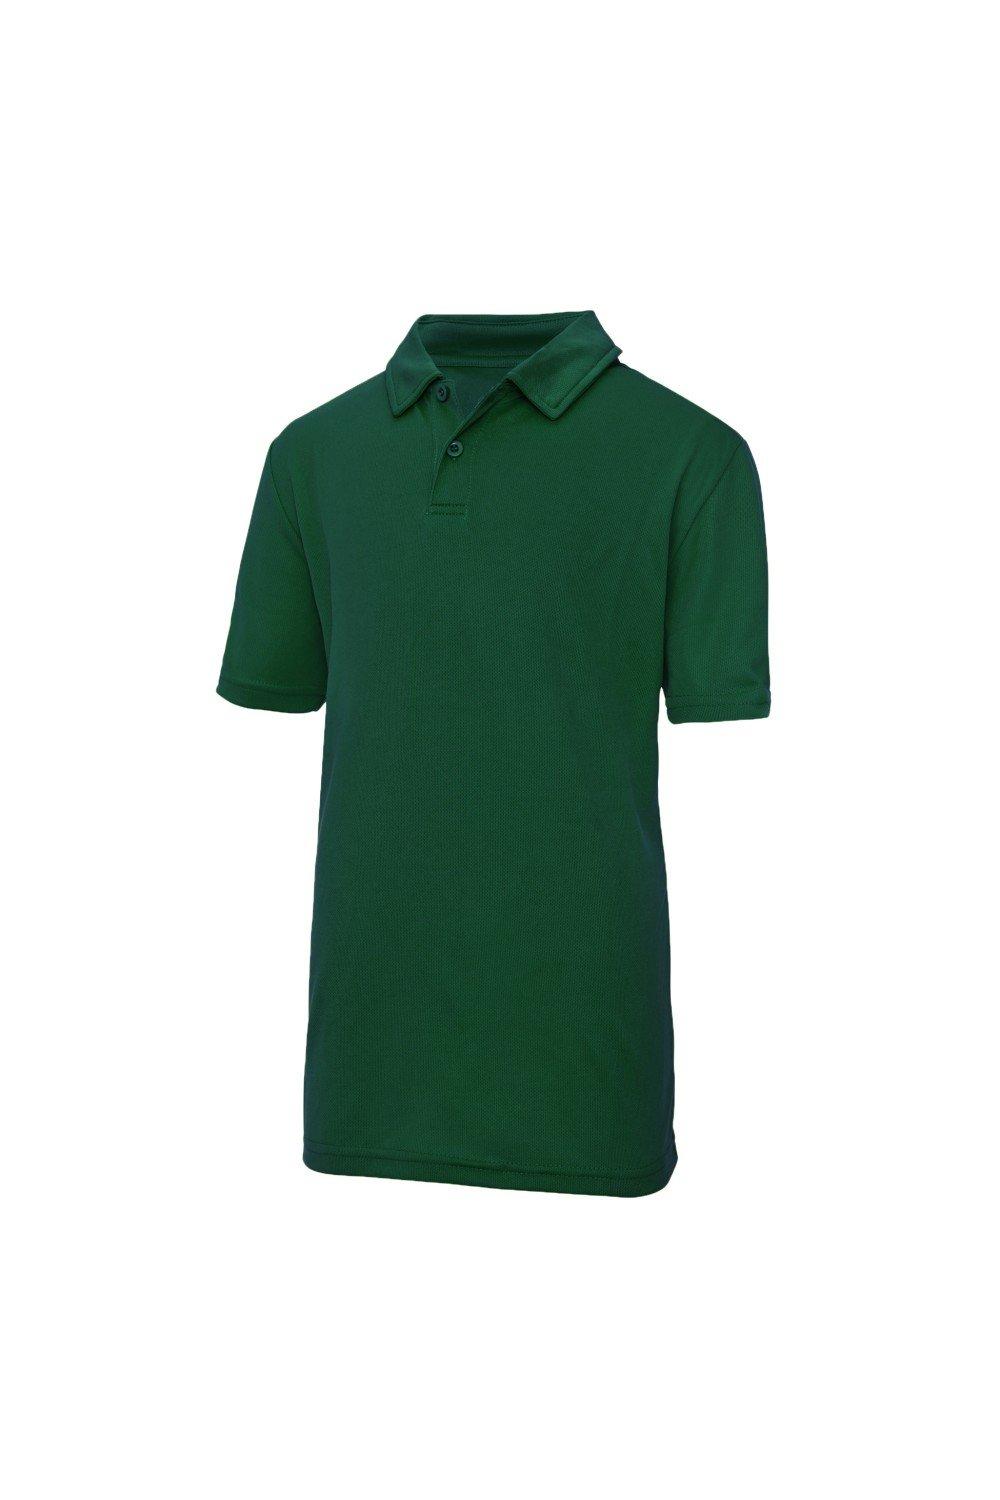 Sports Polo Plain Shirt (Pack of 2)